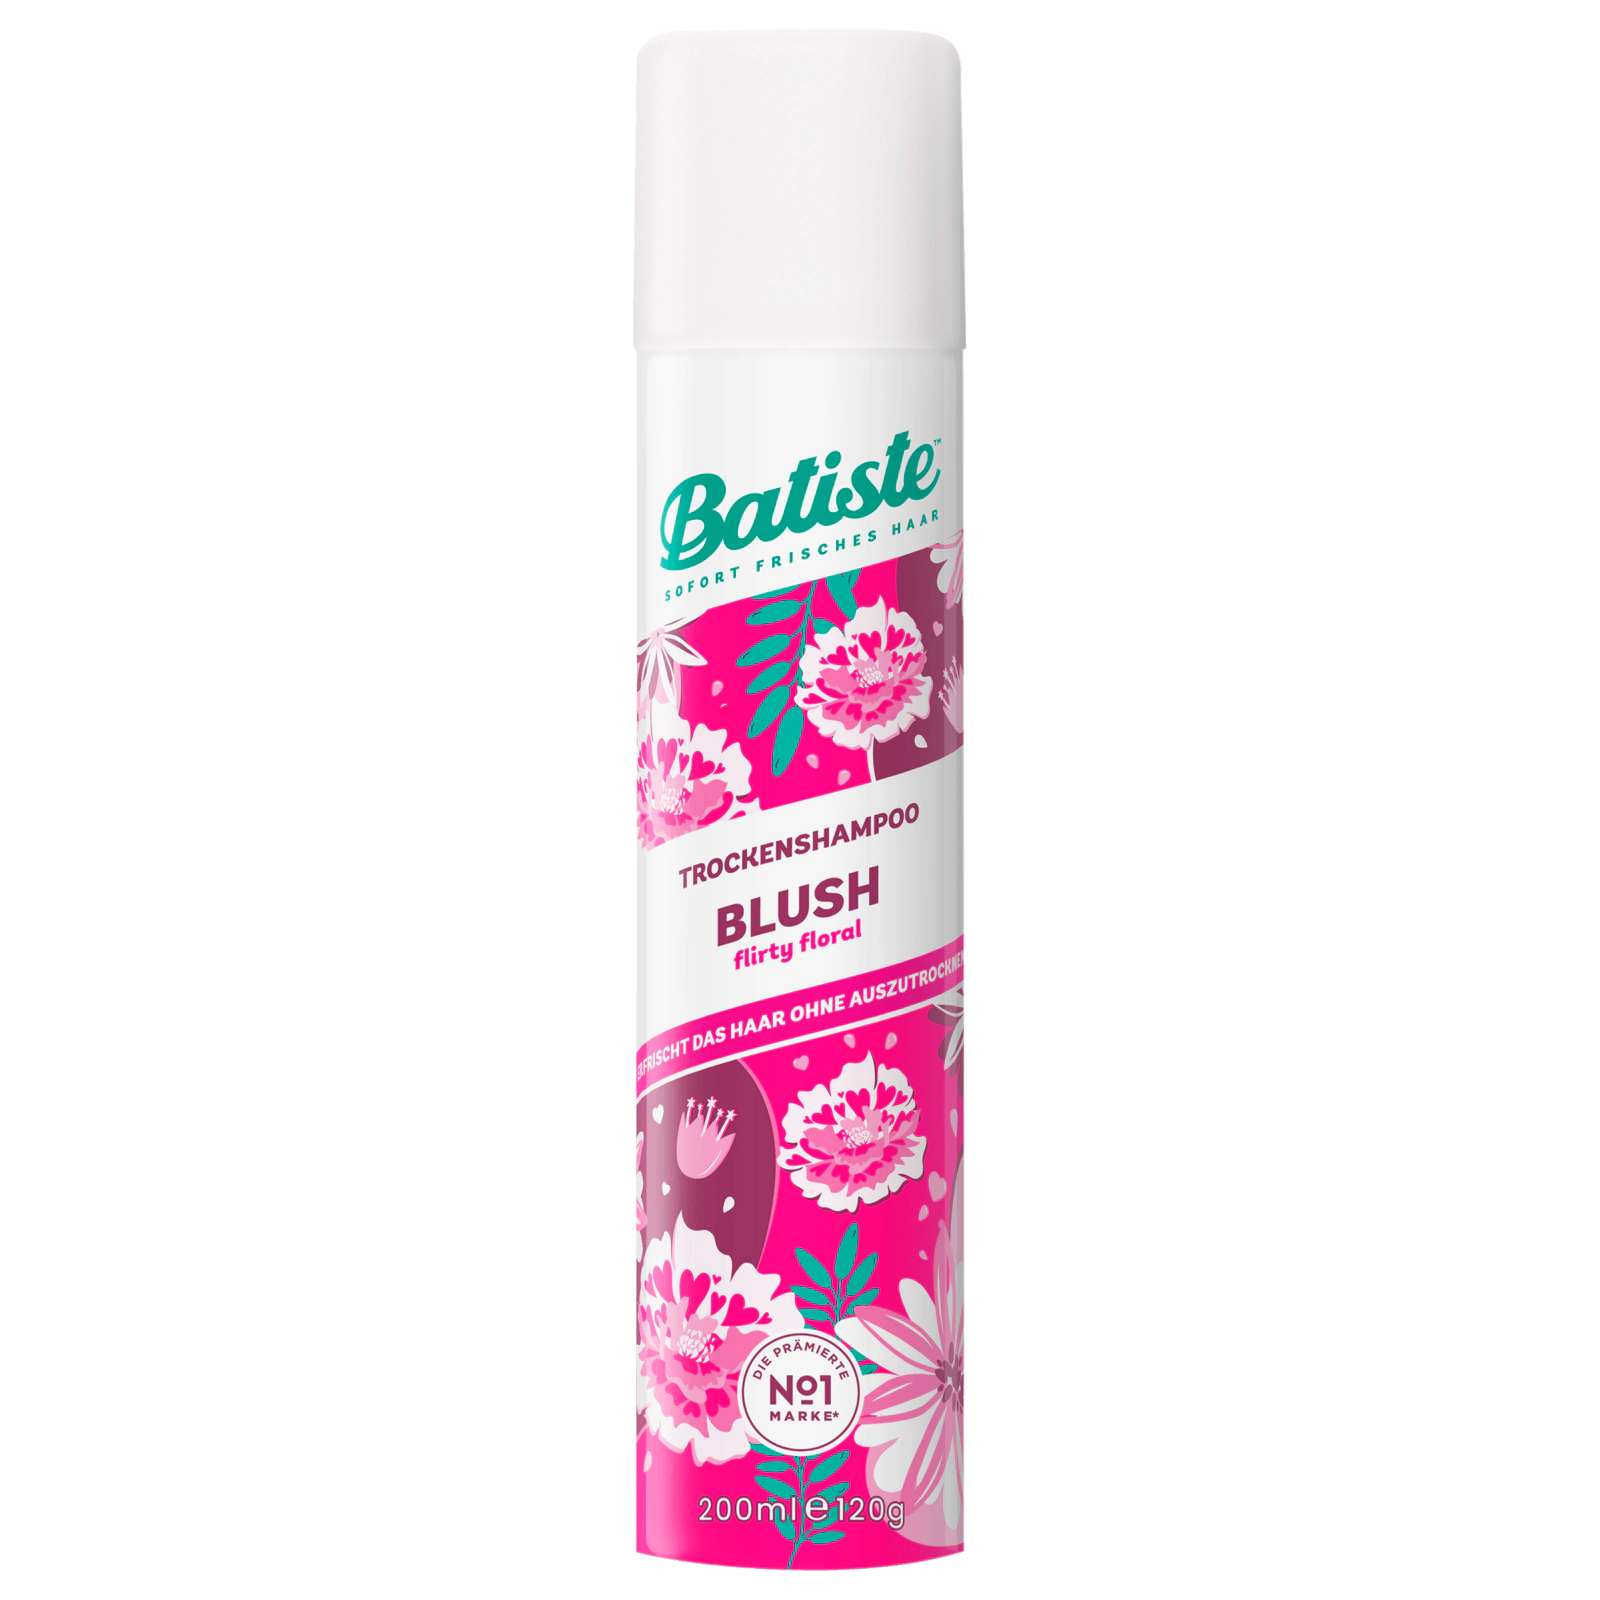 Batiste Dry Shampoo in Blush 200ml, Floral & Flirty Fragrance, No Rinse Spray to Refresh Hair in Between Washes